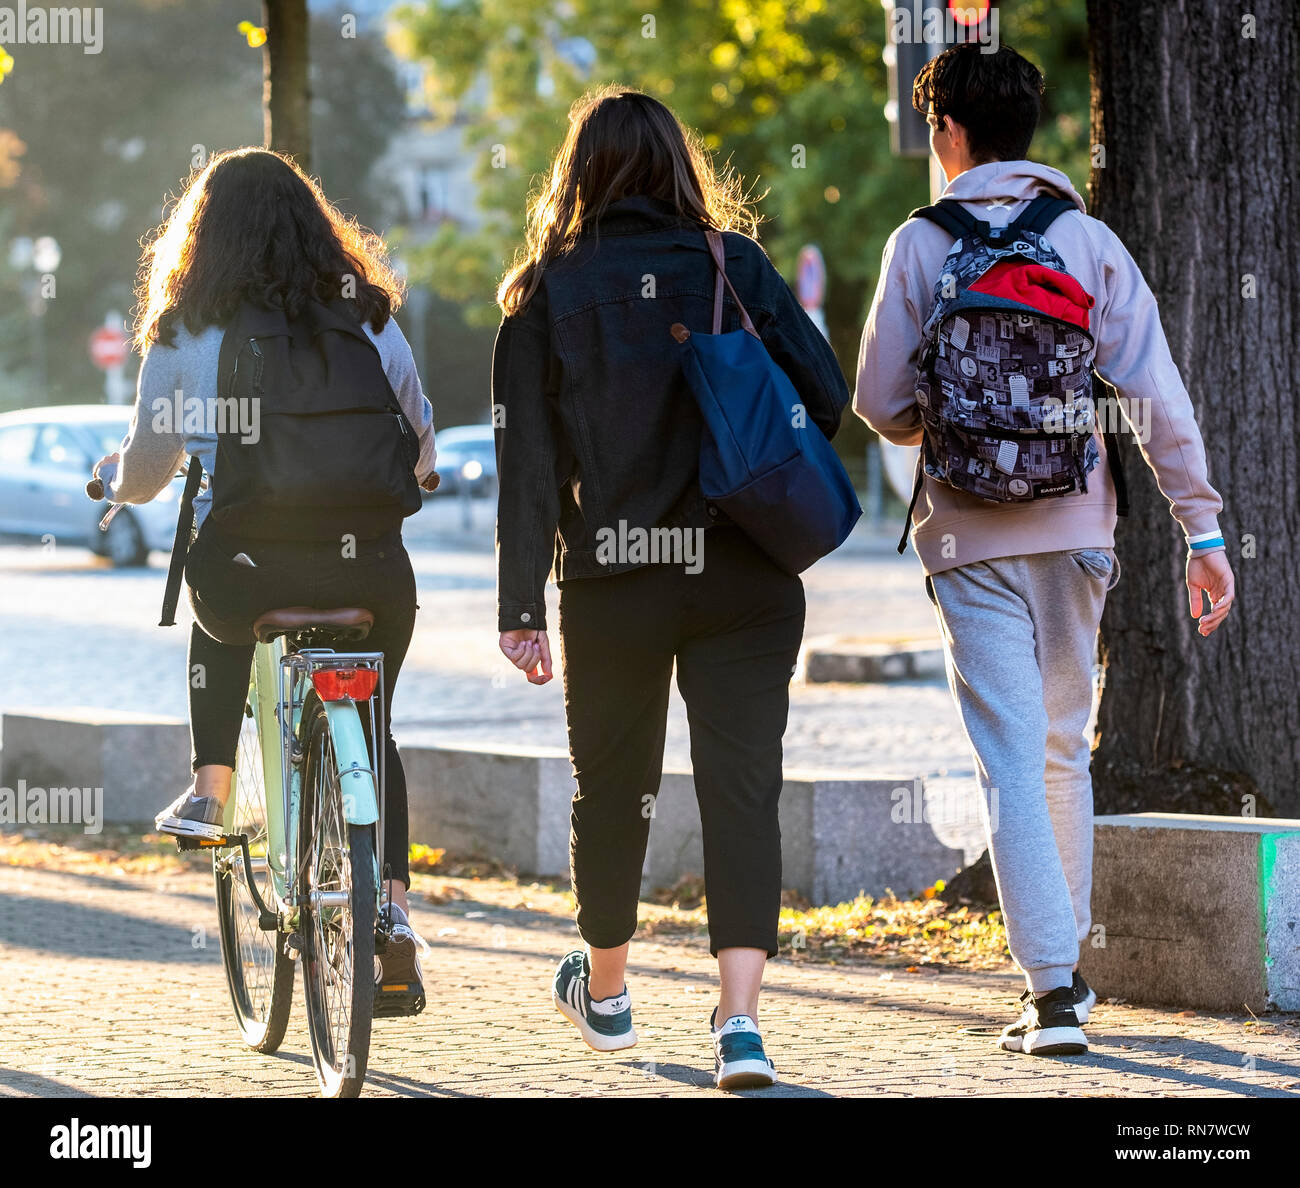 Strasbourg, Alsace, France, Europe, rear view of 2 teenagers walking and one girl biking on pavement, Stock Photo